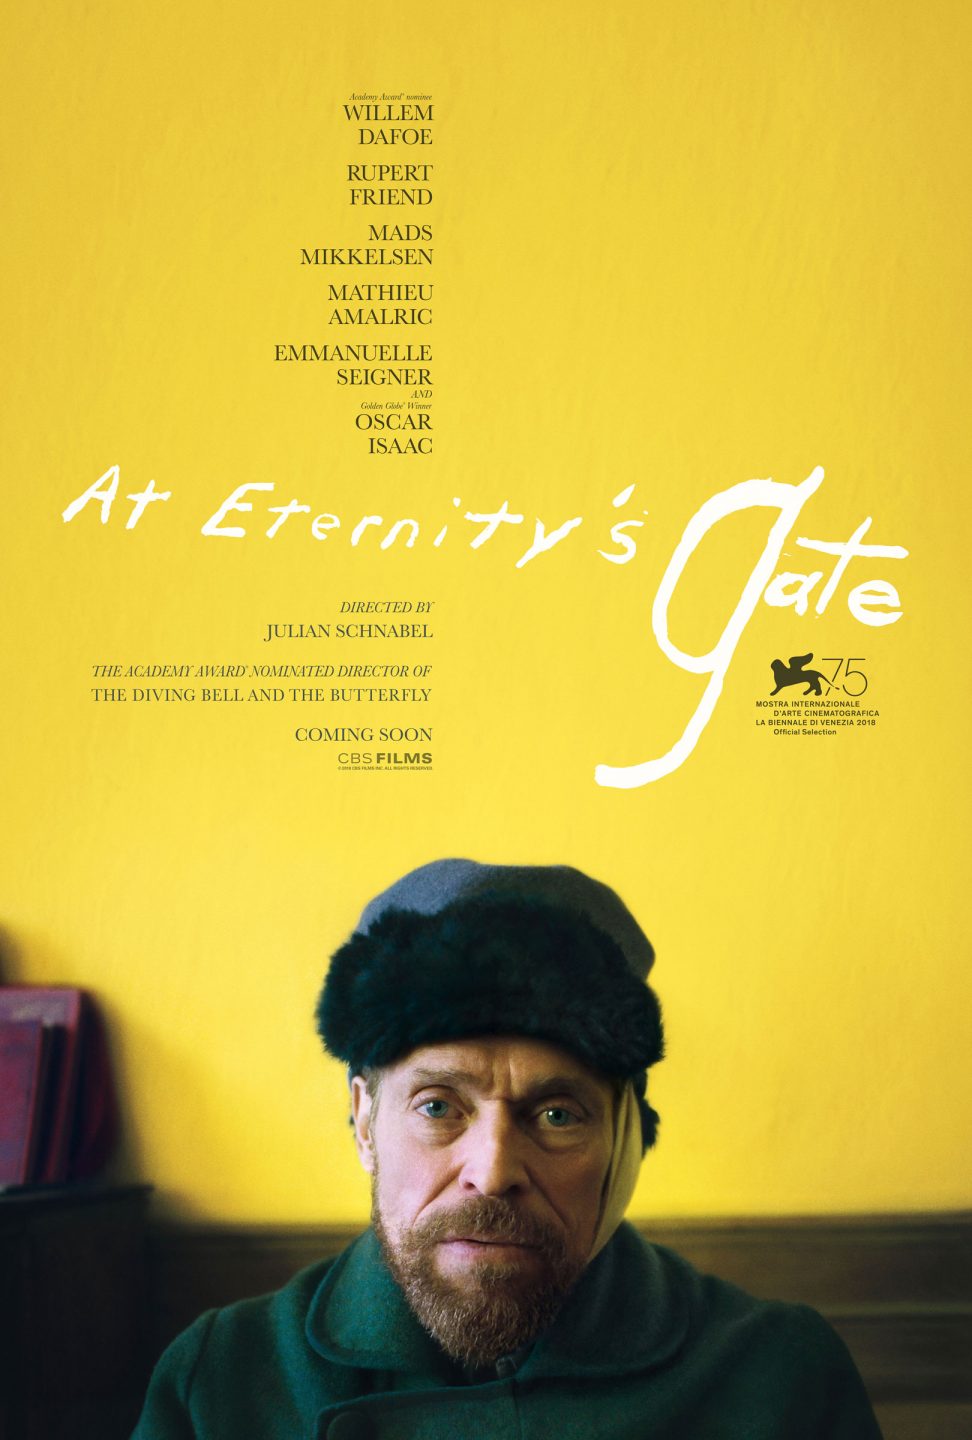 At Eternity's Gate poster (CBS Films)